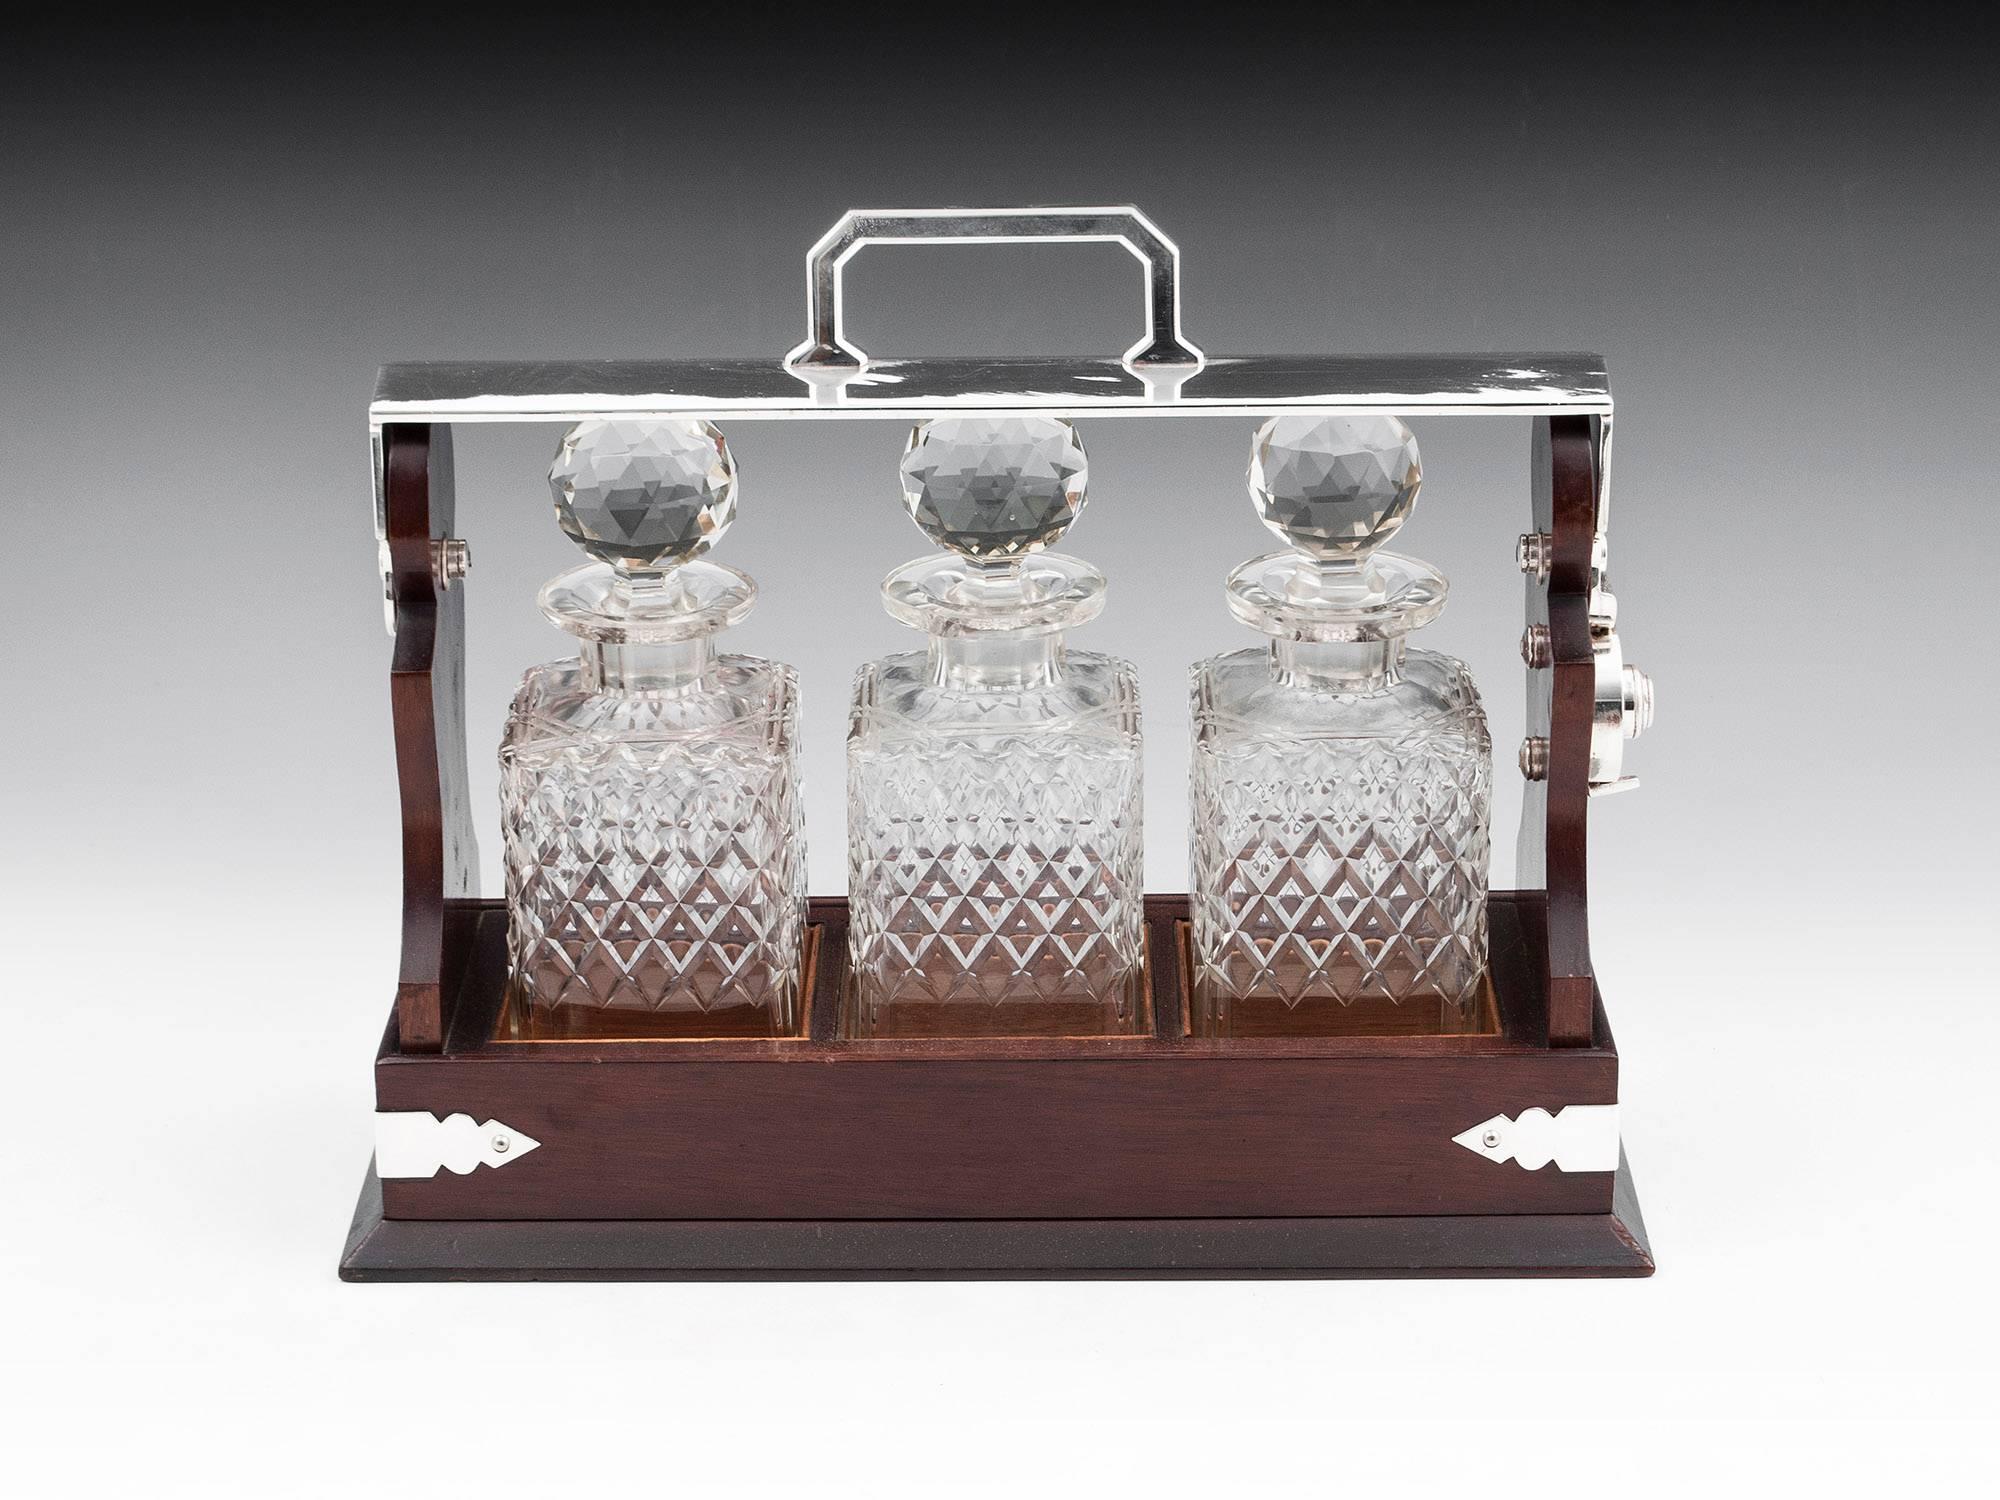 Antique Mahogany Tantalus with silver plate handle and corner brackets. 

The silver-plated brass handle is marked: 
142 & 144 JAYS Oxford St. W 

Contains three hobnail cut crystal decanters with faceted stoppers. Once unlocked the key barrel